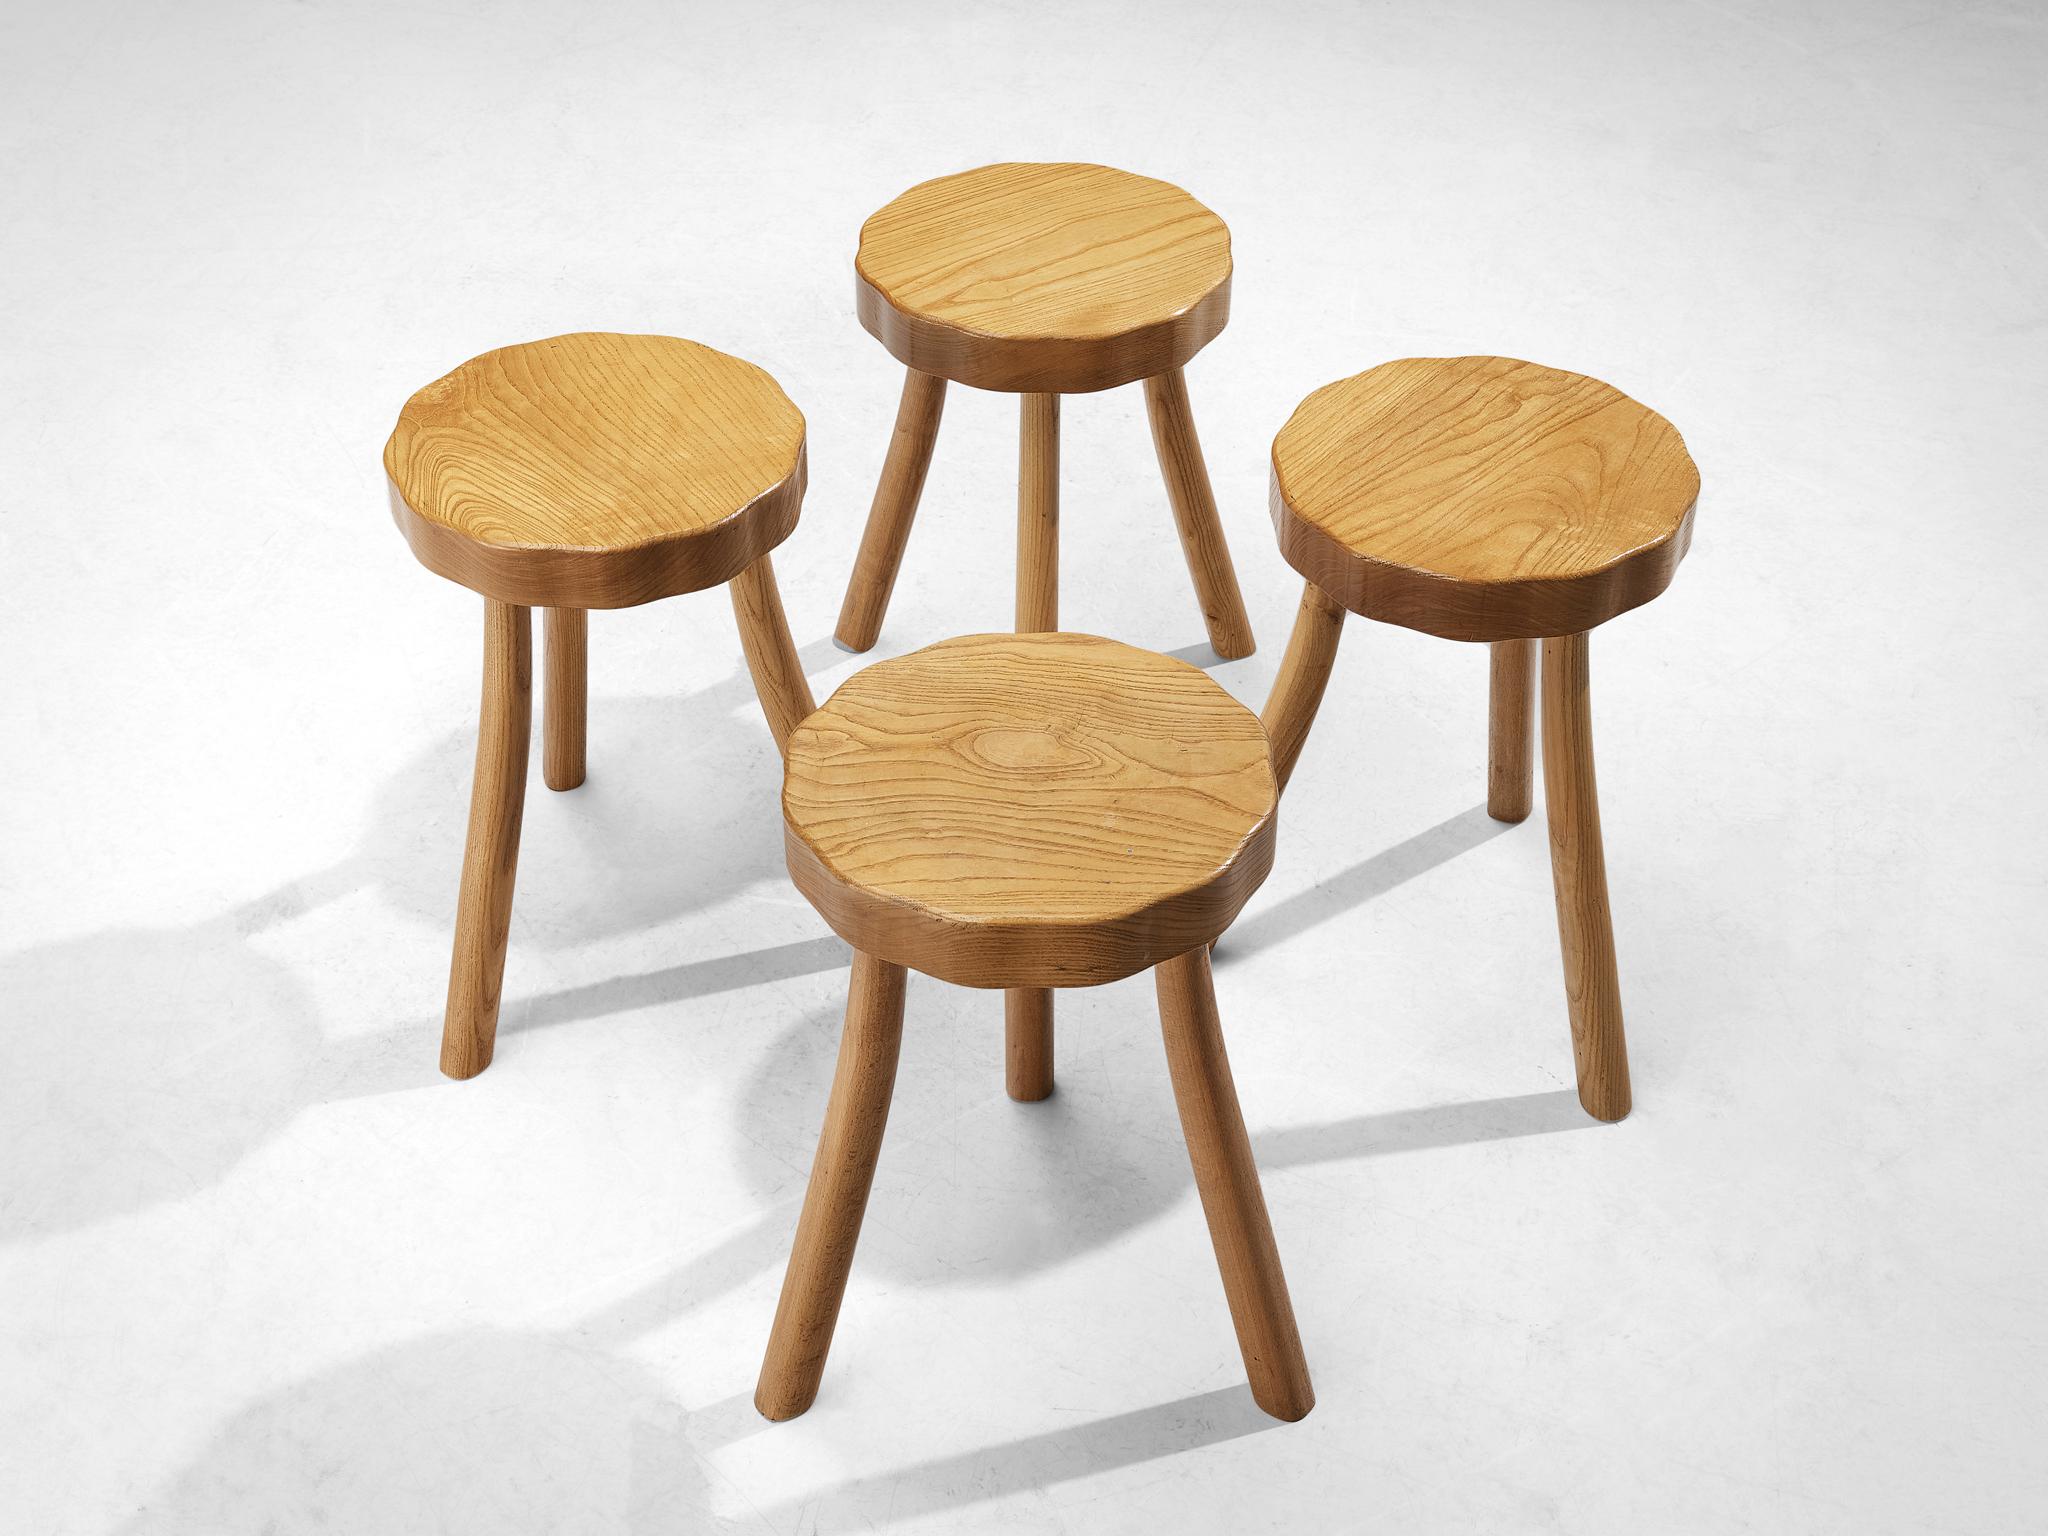 Stools, elm, France, 1970s

These stools can be used for various occasions. You can use it as a chair to sit on. Or it can serve as a pedestal to display your valued belongings, such as artistic objects and plants. Besides its functional property,